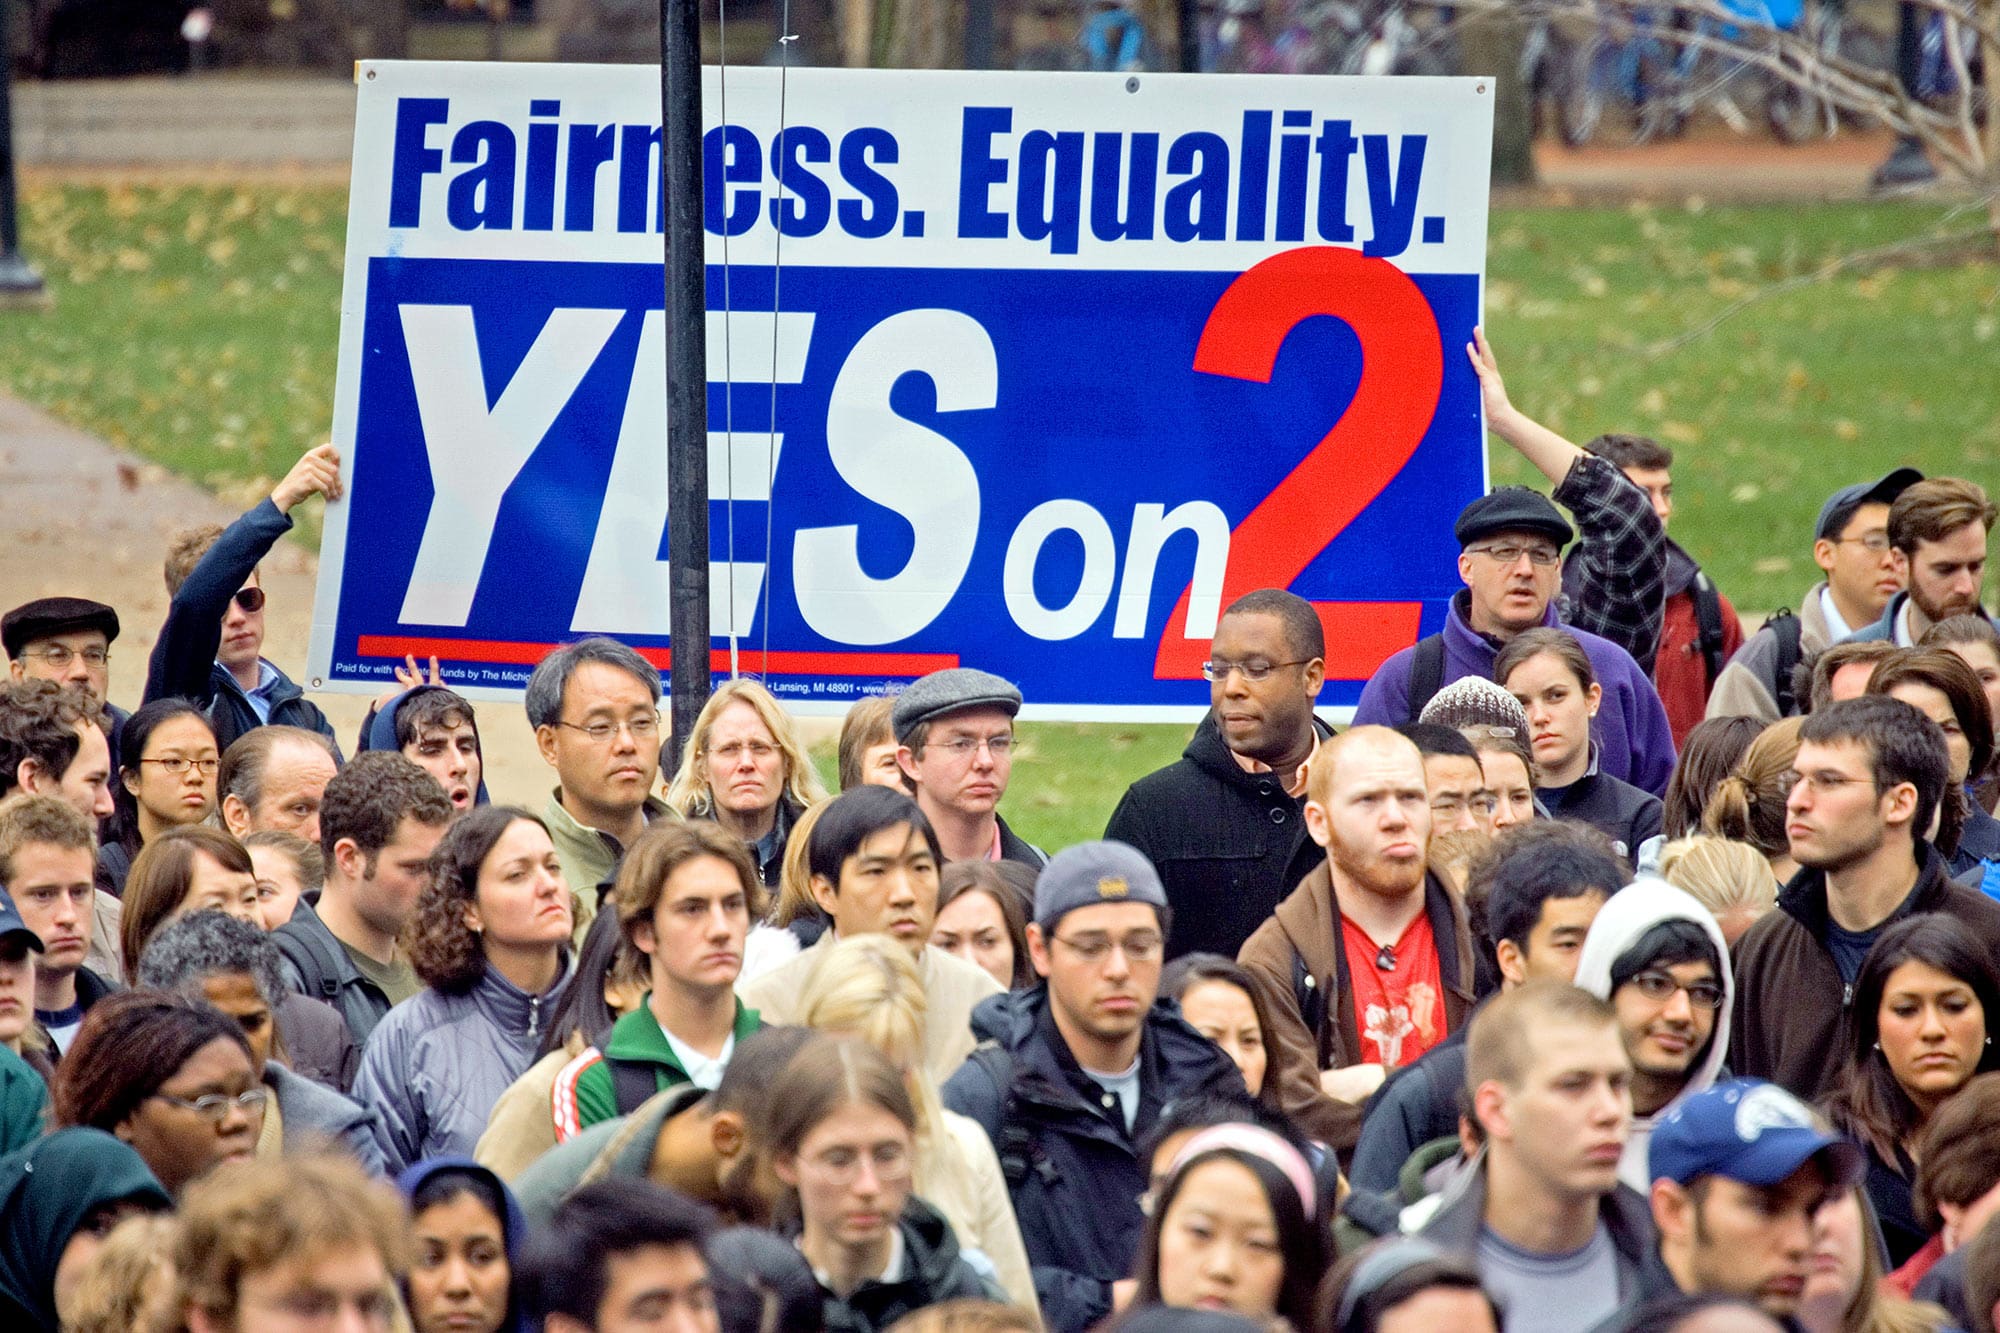 Students gather to hear University of Michigan President Mary Sue Coleman address the community on the Diag, one day after Michigan voters approved Proposal 2. Ann Arbor campus, November 8, 2006.